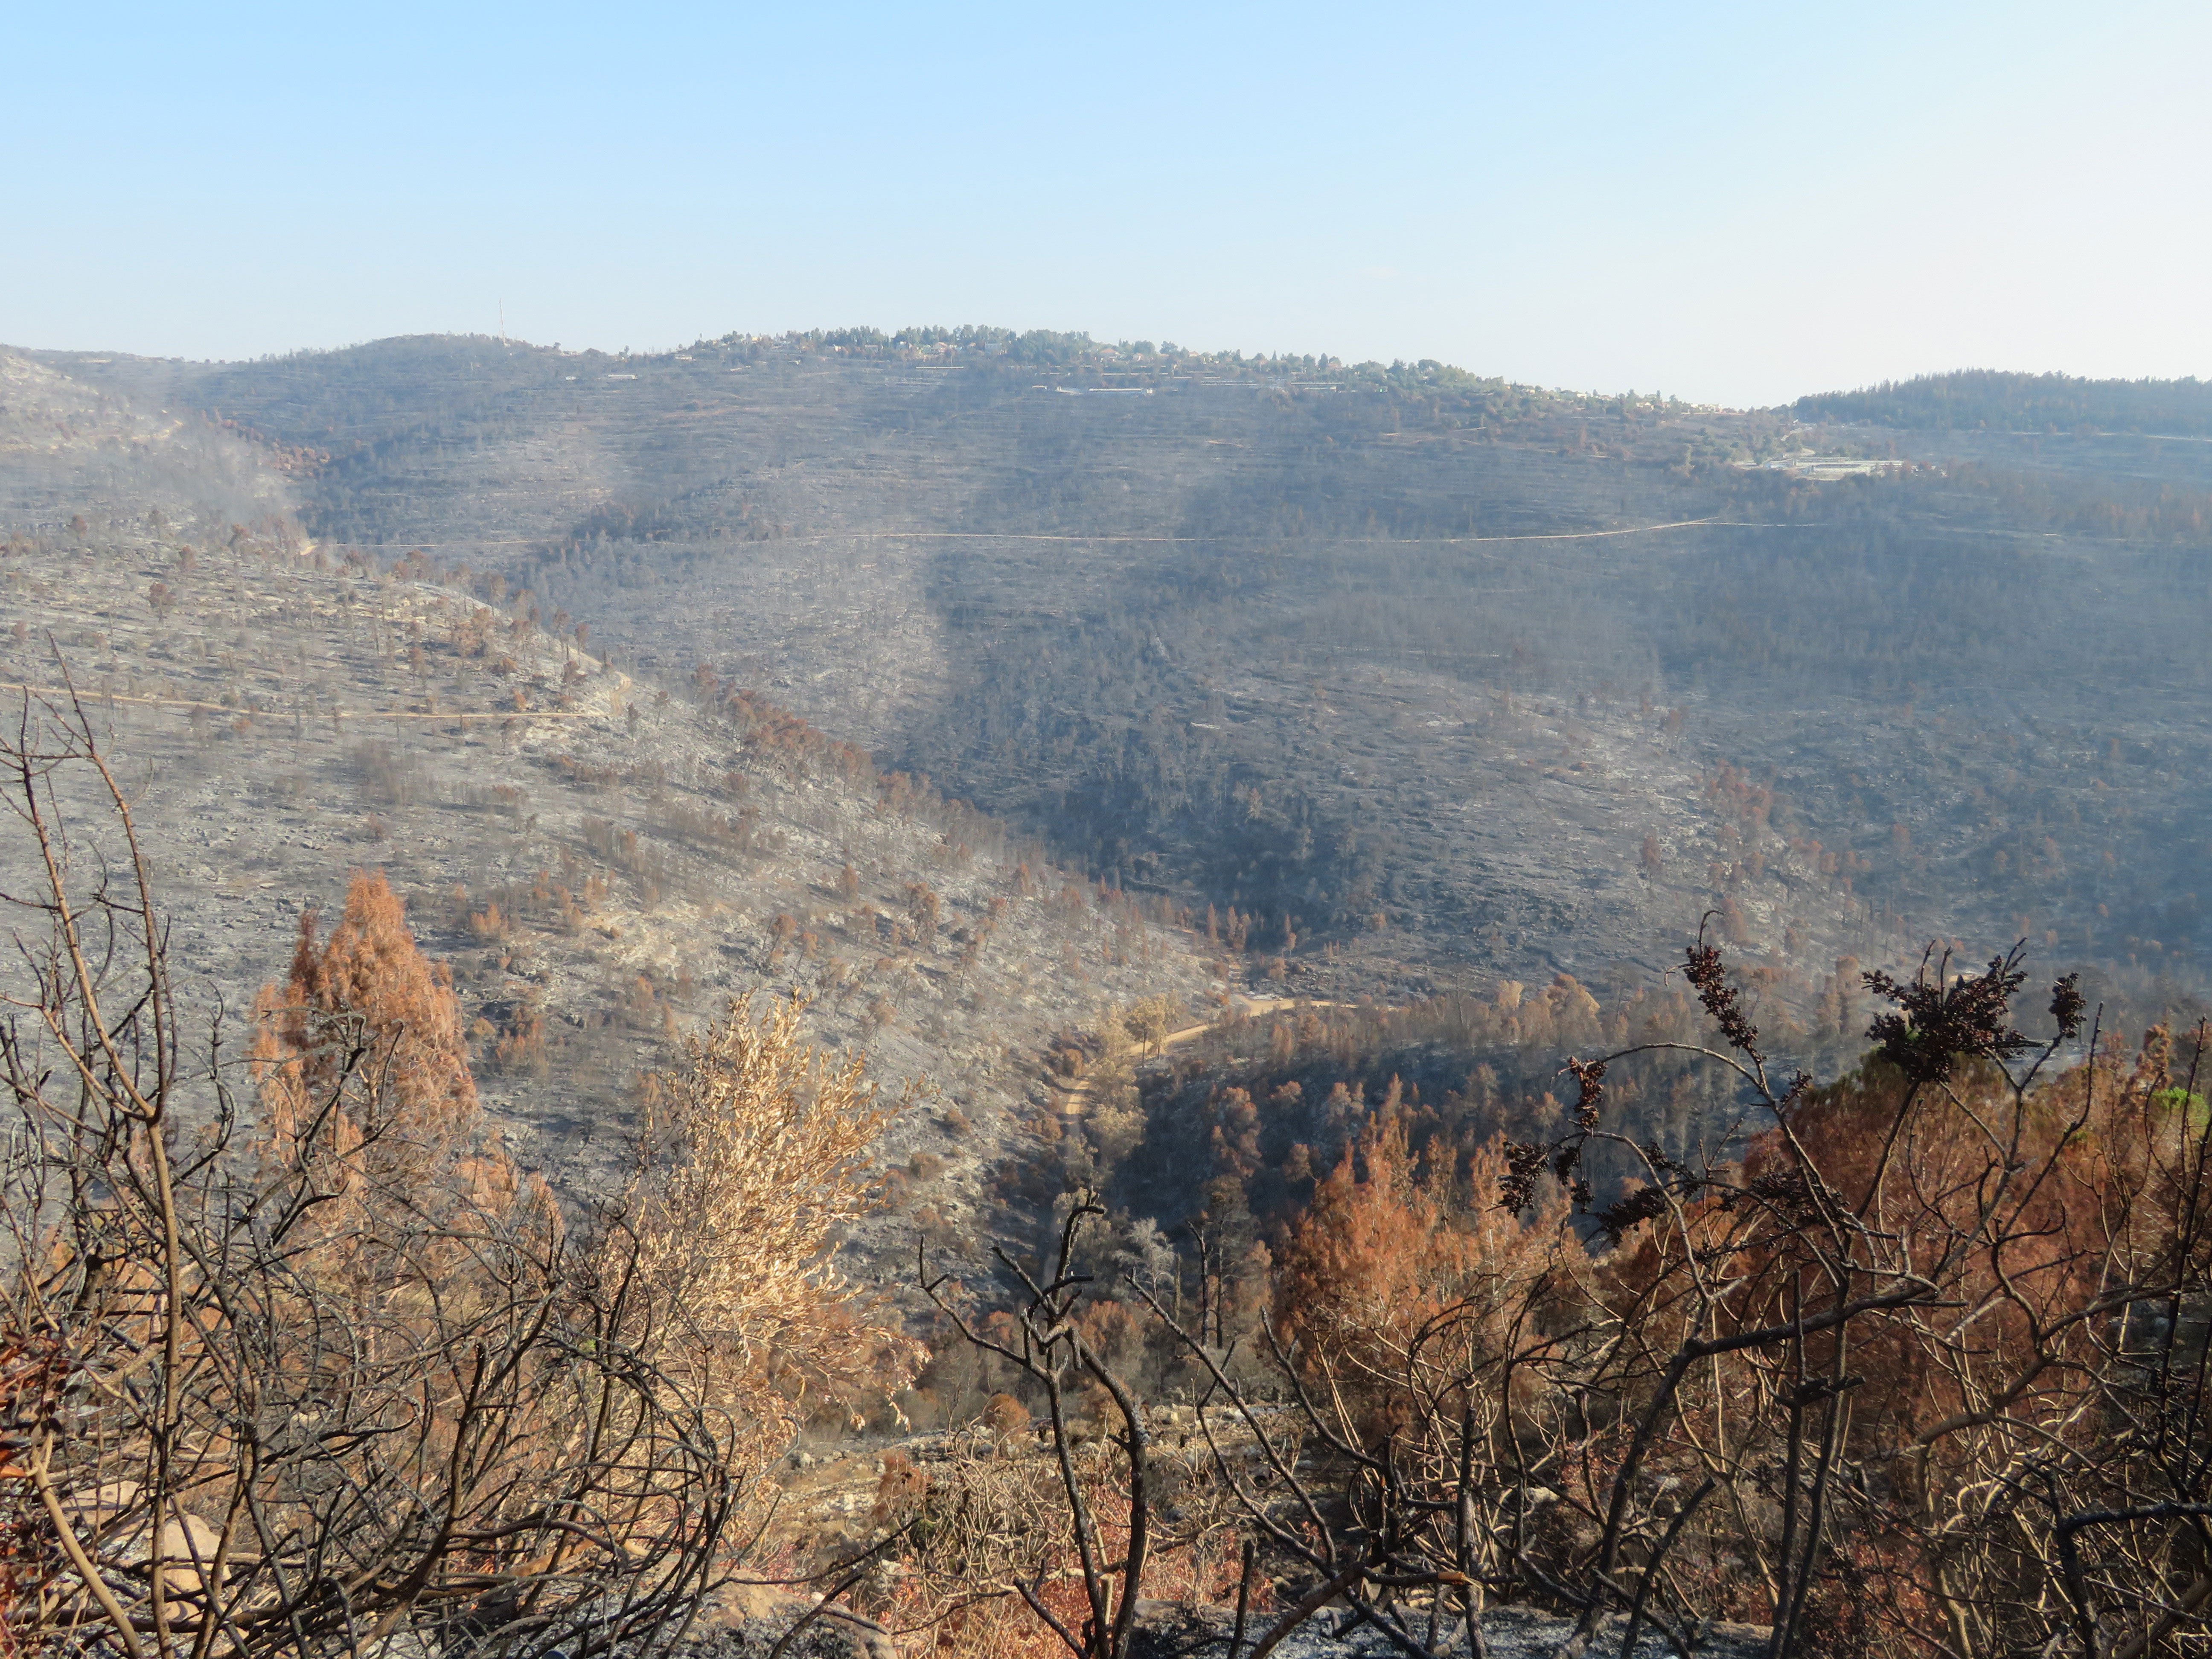 Scene of devastation. The aftermath of the August forest fire west of Jerusalem.